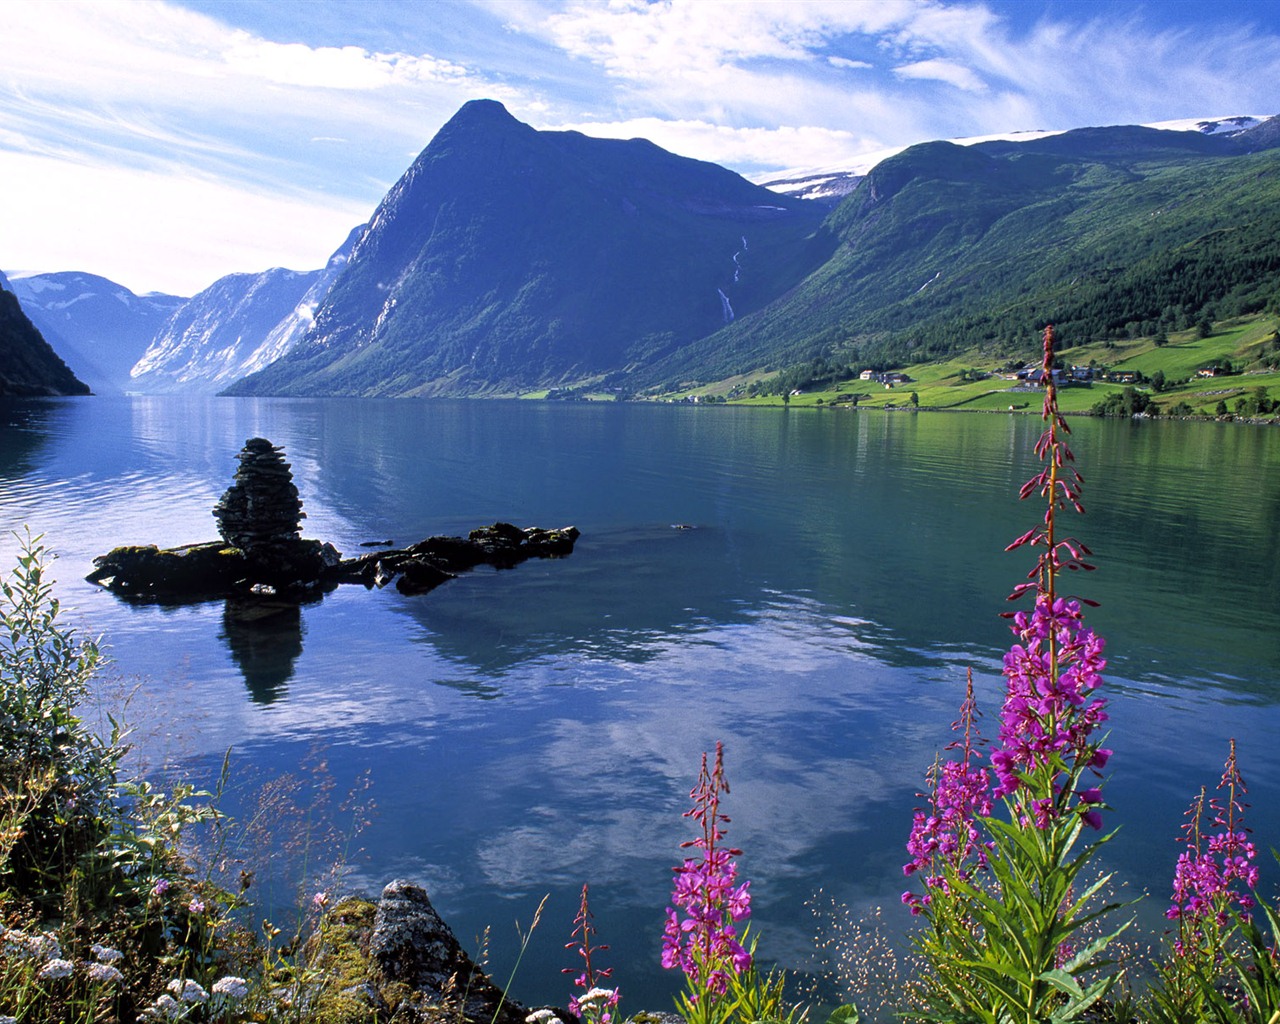 Windows 7 Wallpapers: Nordic Landscapes #5 - 1280x1024